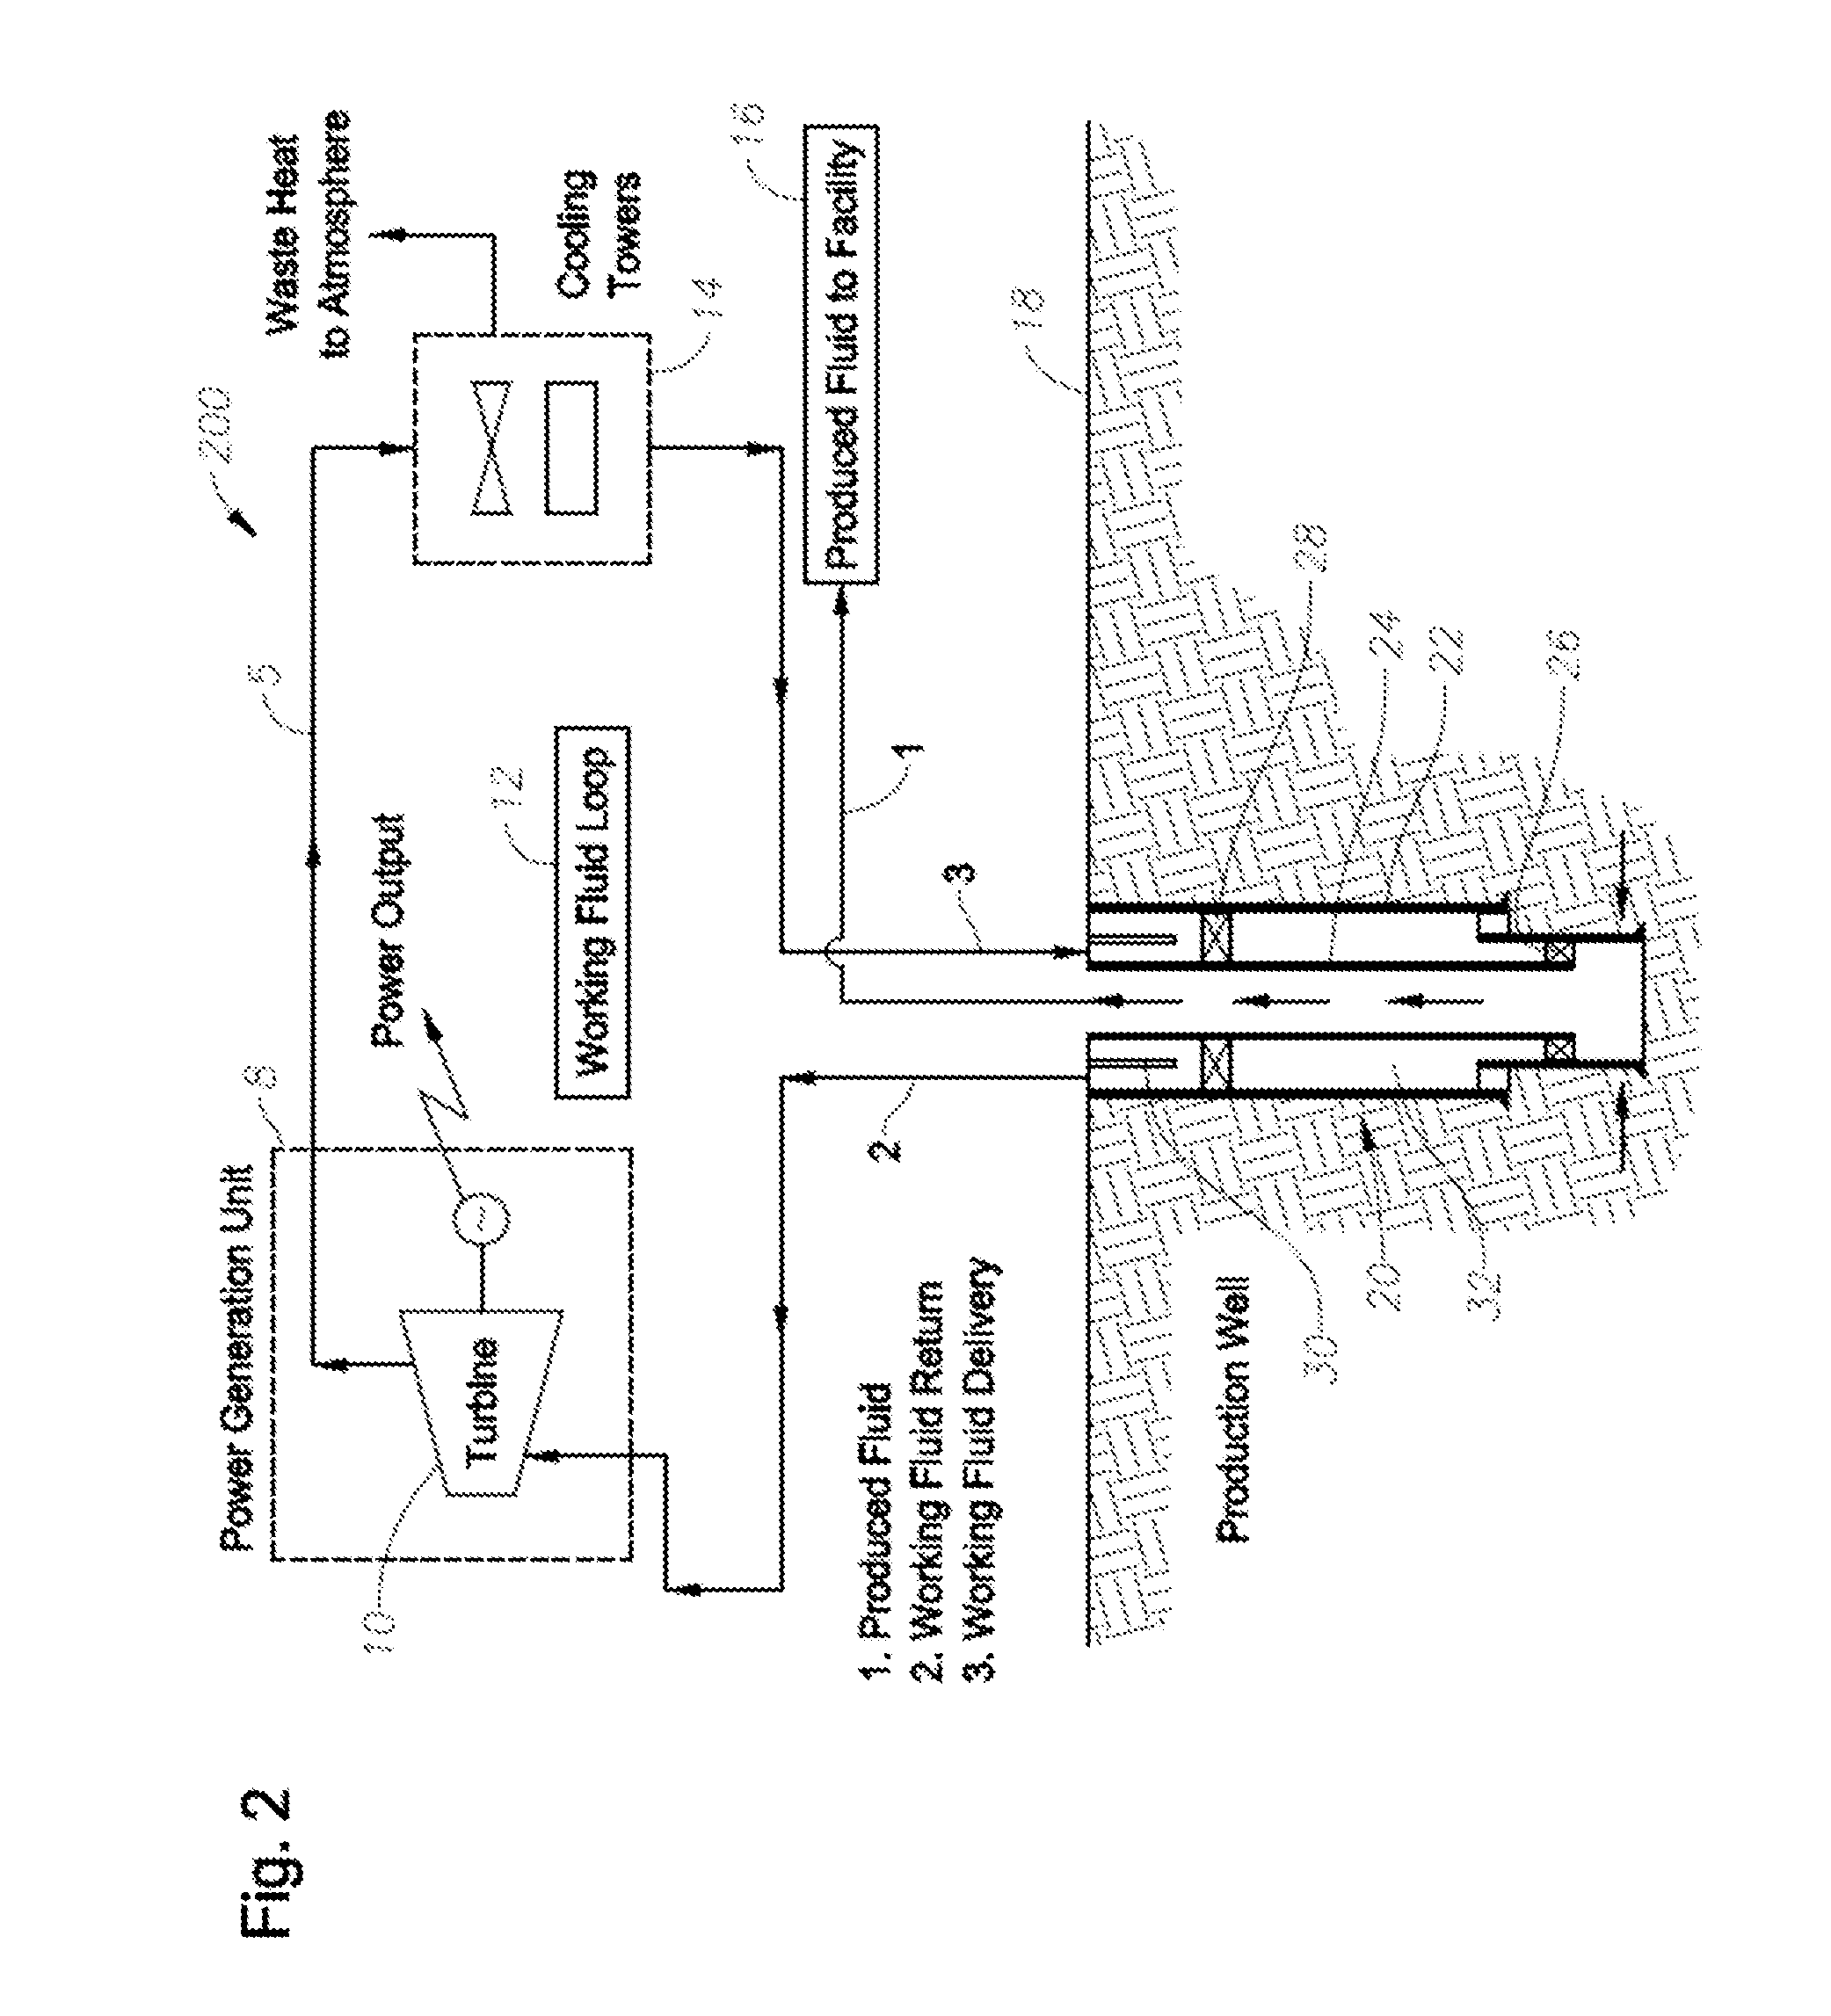 Systems and methods for co-production of geothermal energy and fluids